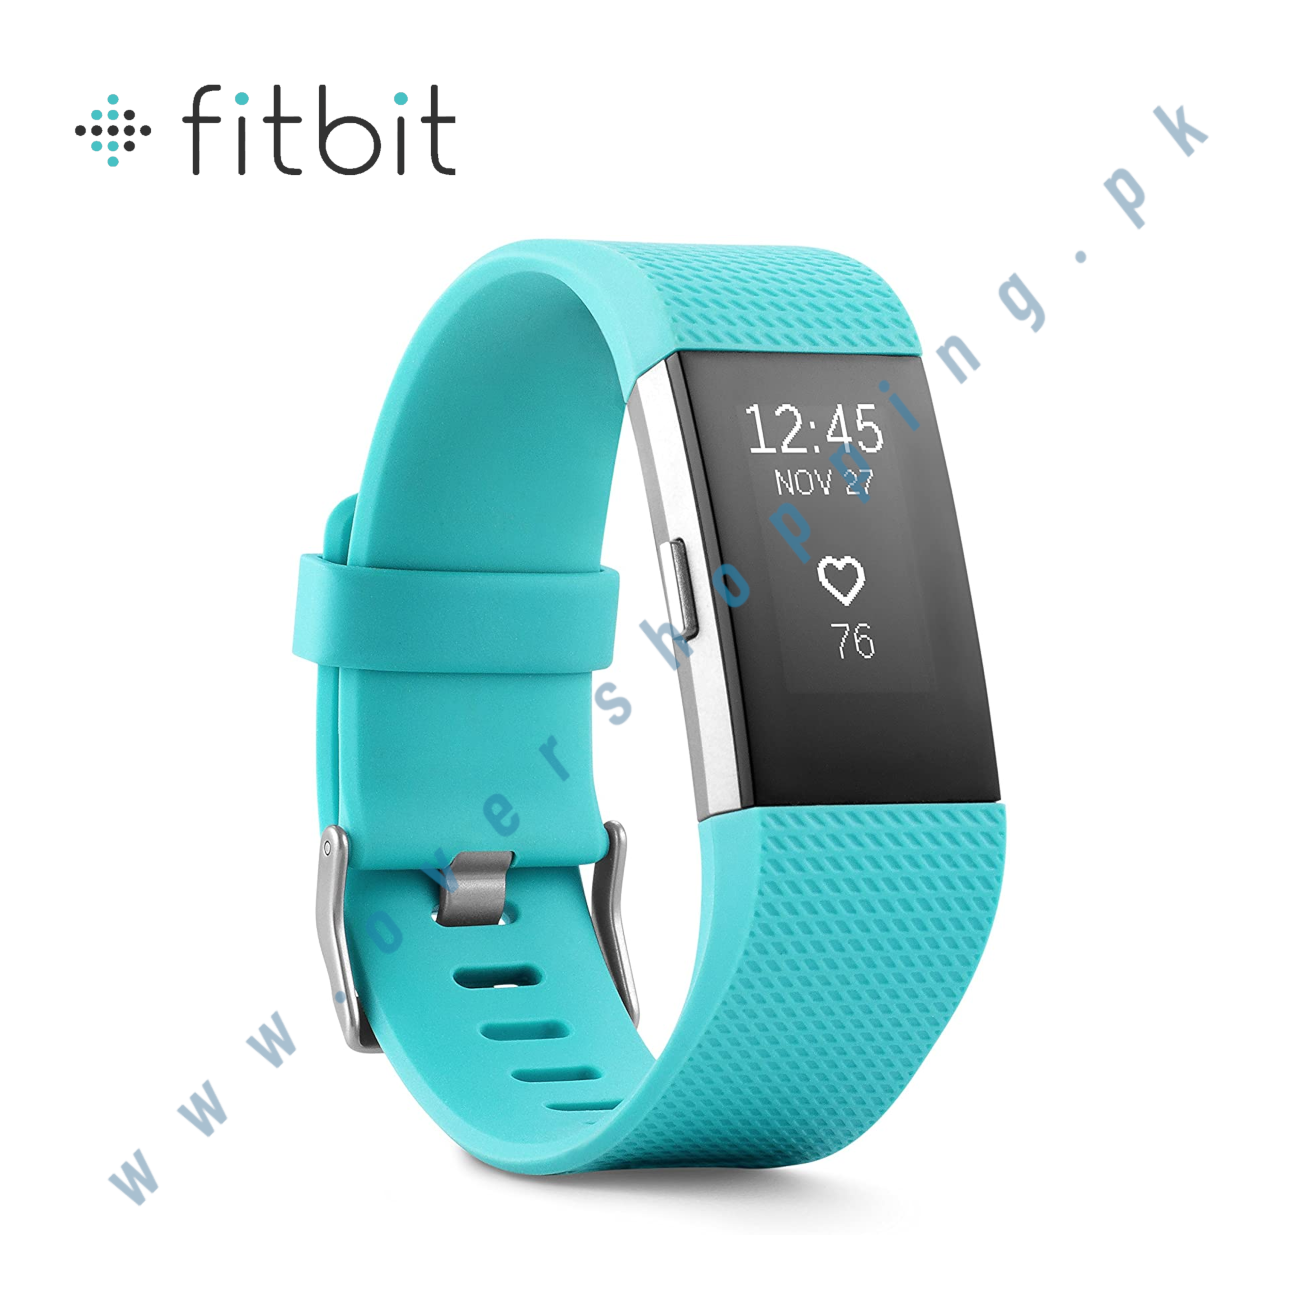 Fitbit Charge 2 Heart Rate + Fitness Wristband, Teal, Small